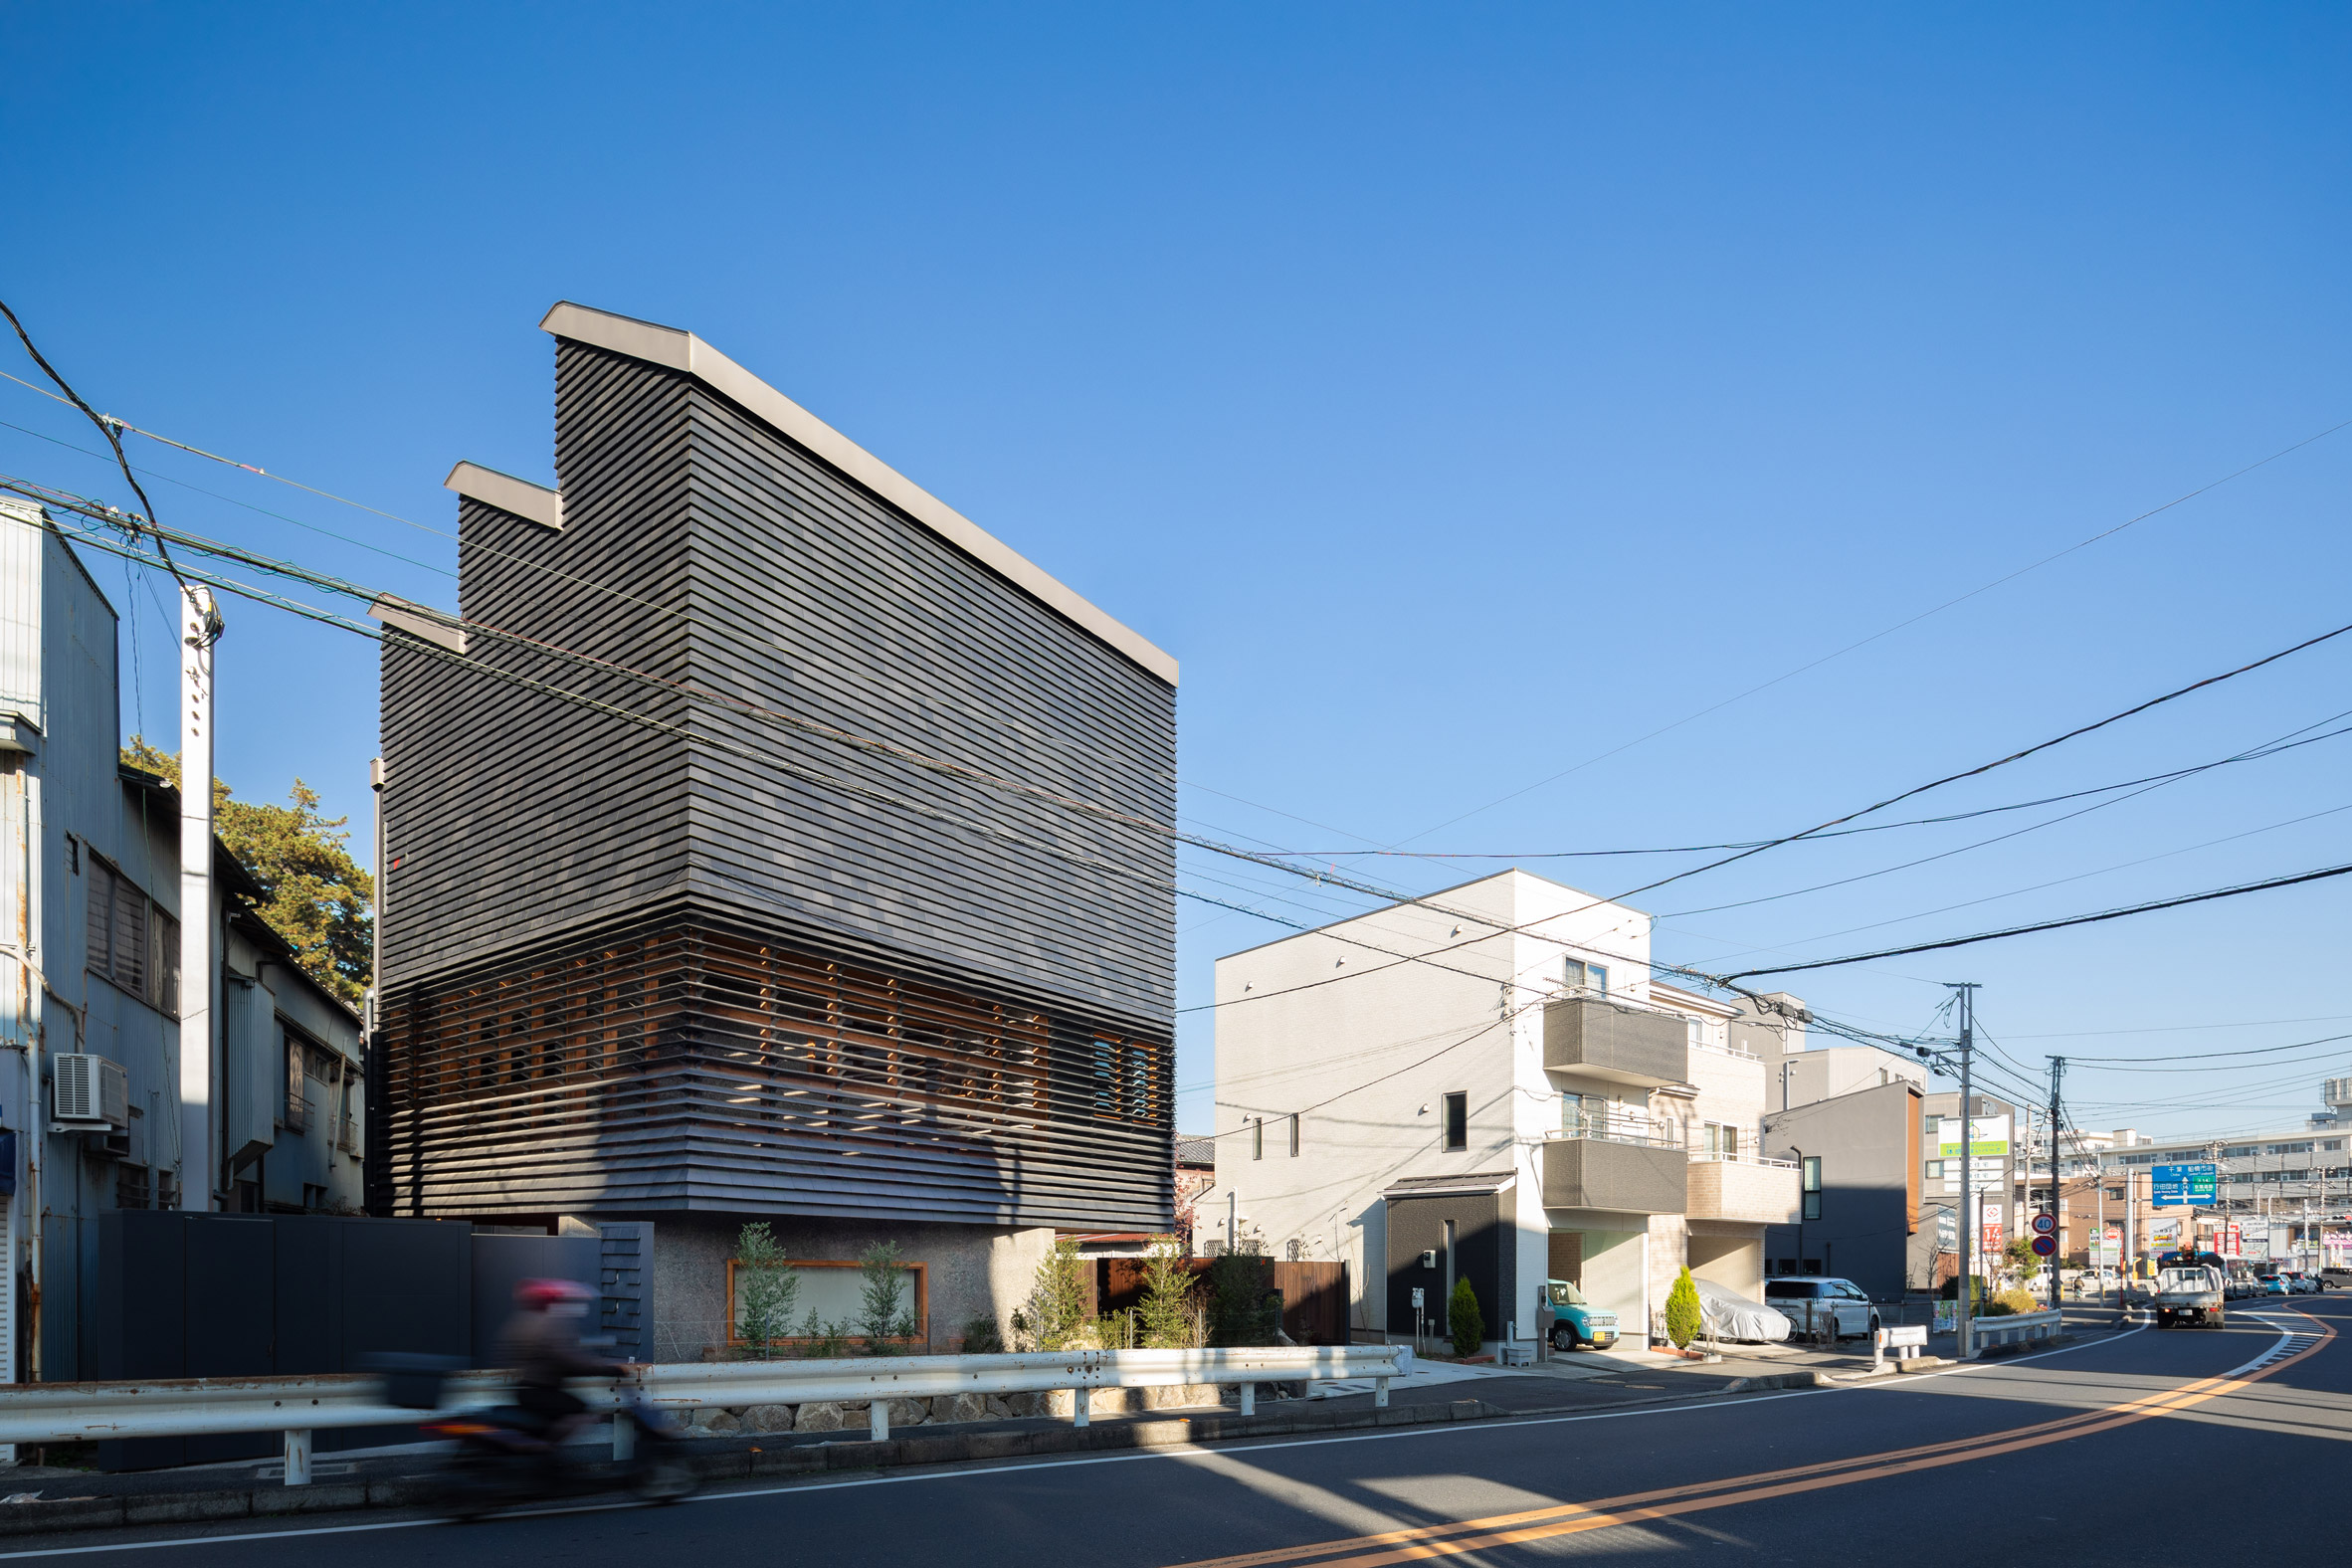 Black-tiled house and gallery in Chiba